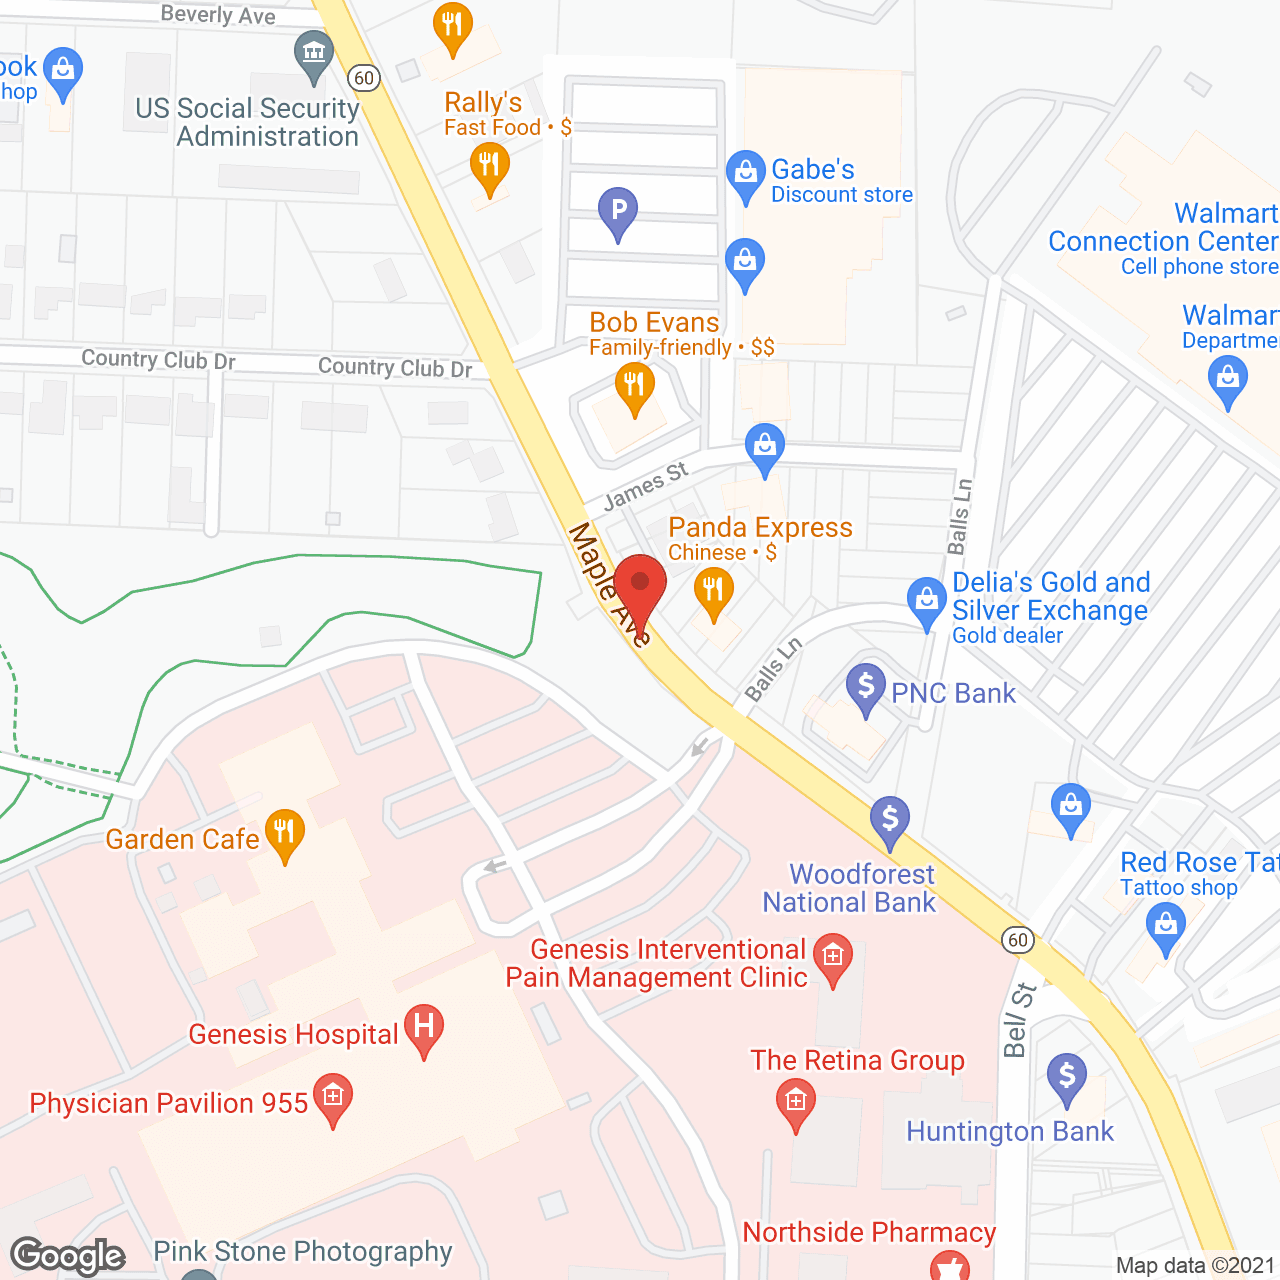 The Oaks at Bethesda in google map